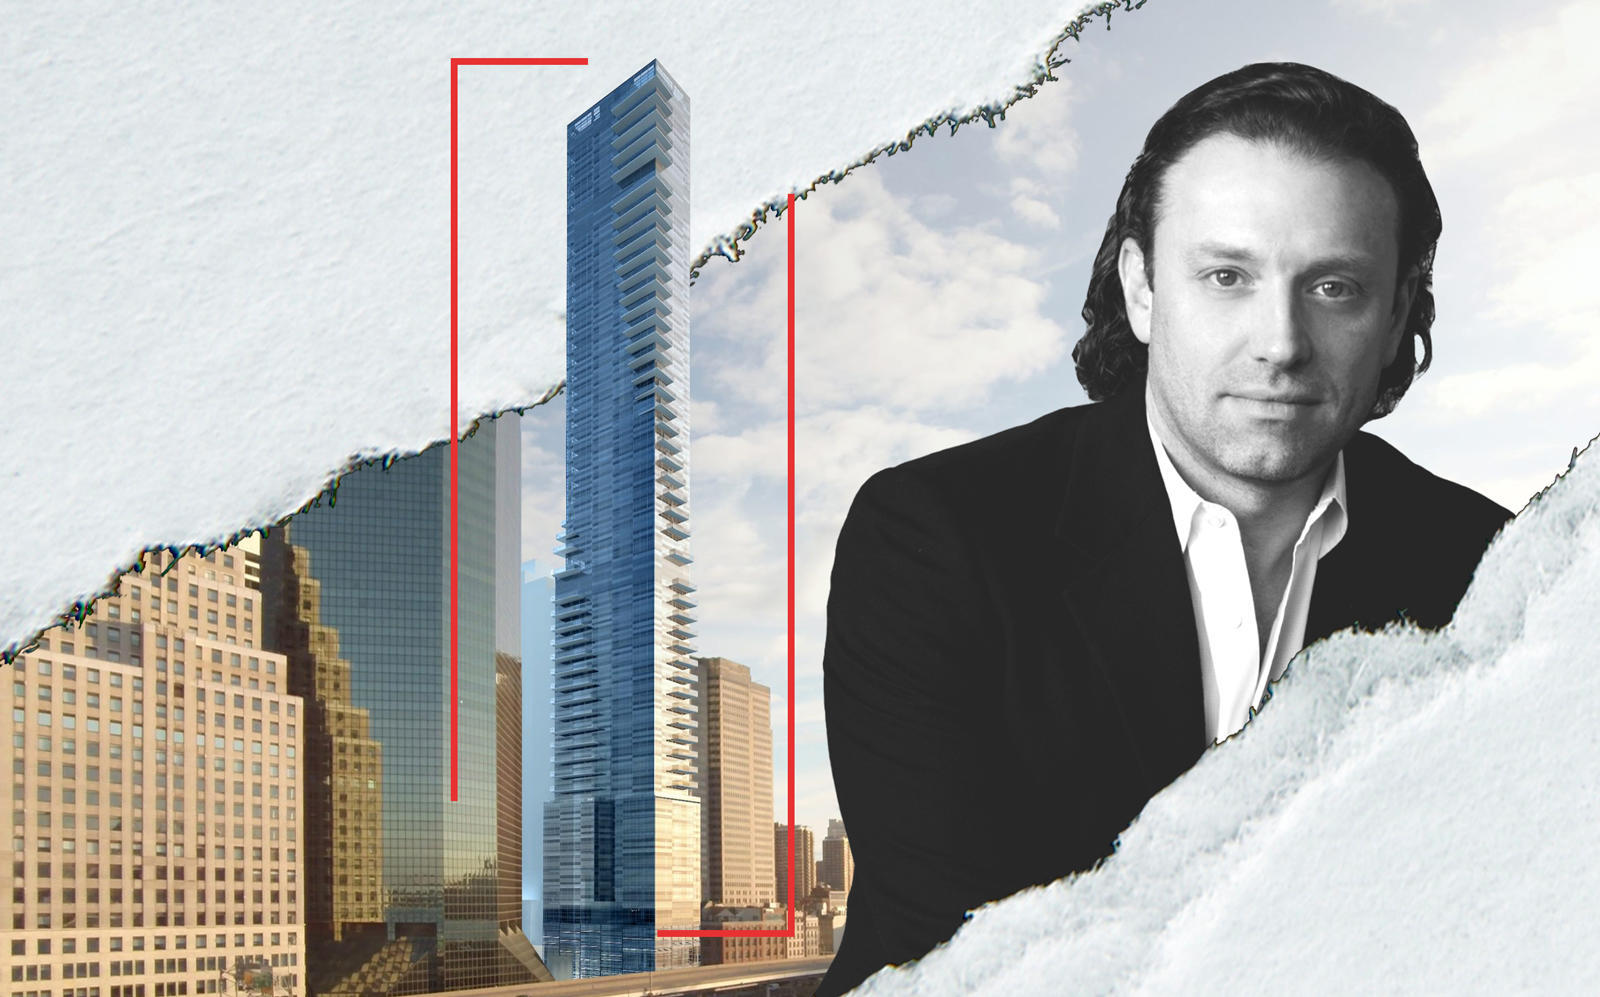 161 Maiden Lane and Fortis CEO Jonathan J. Landau (Hill West Architects; Fortis)